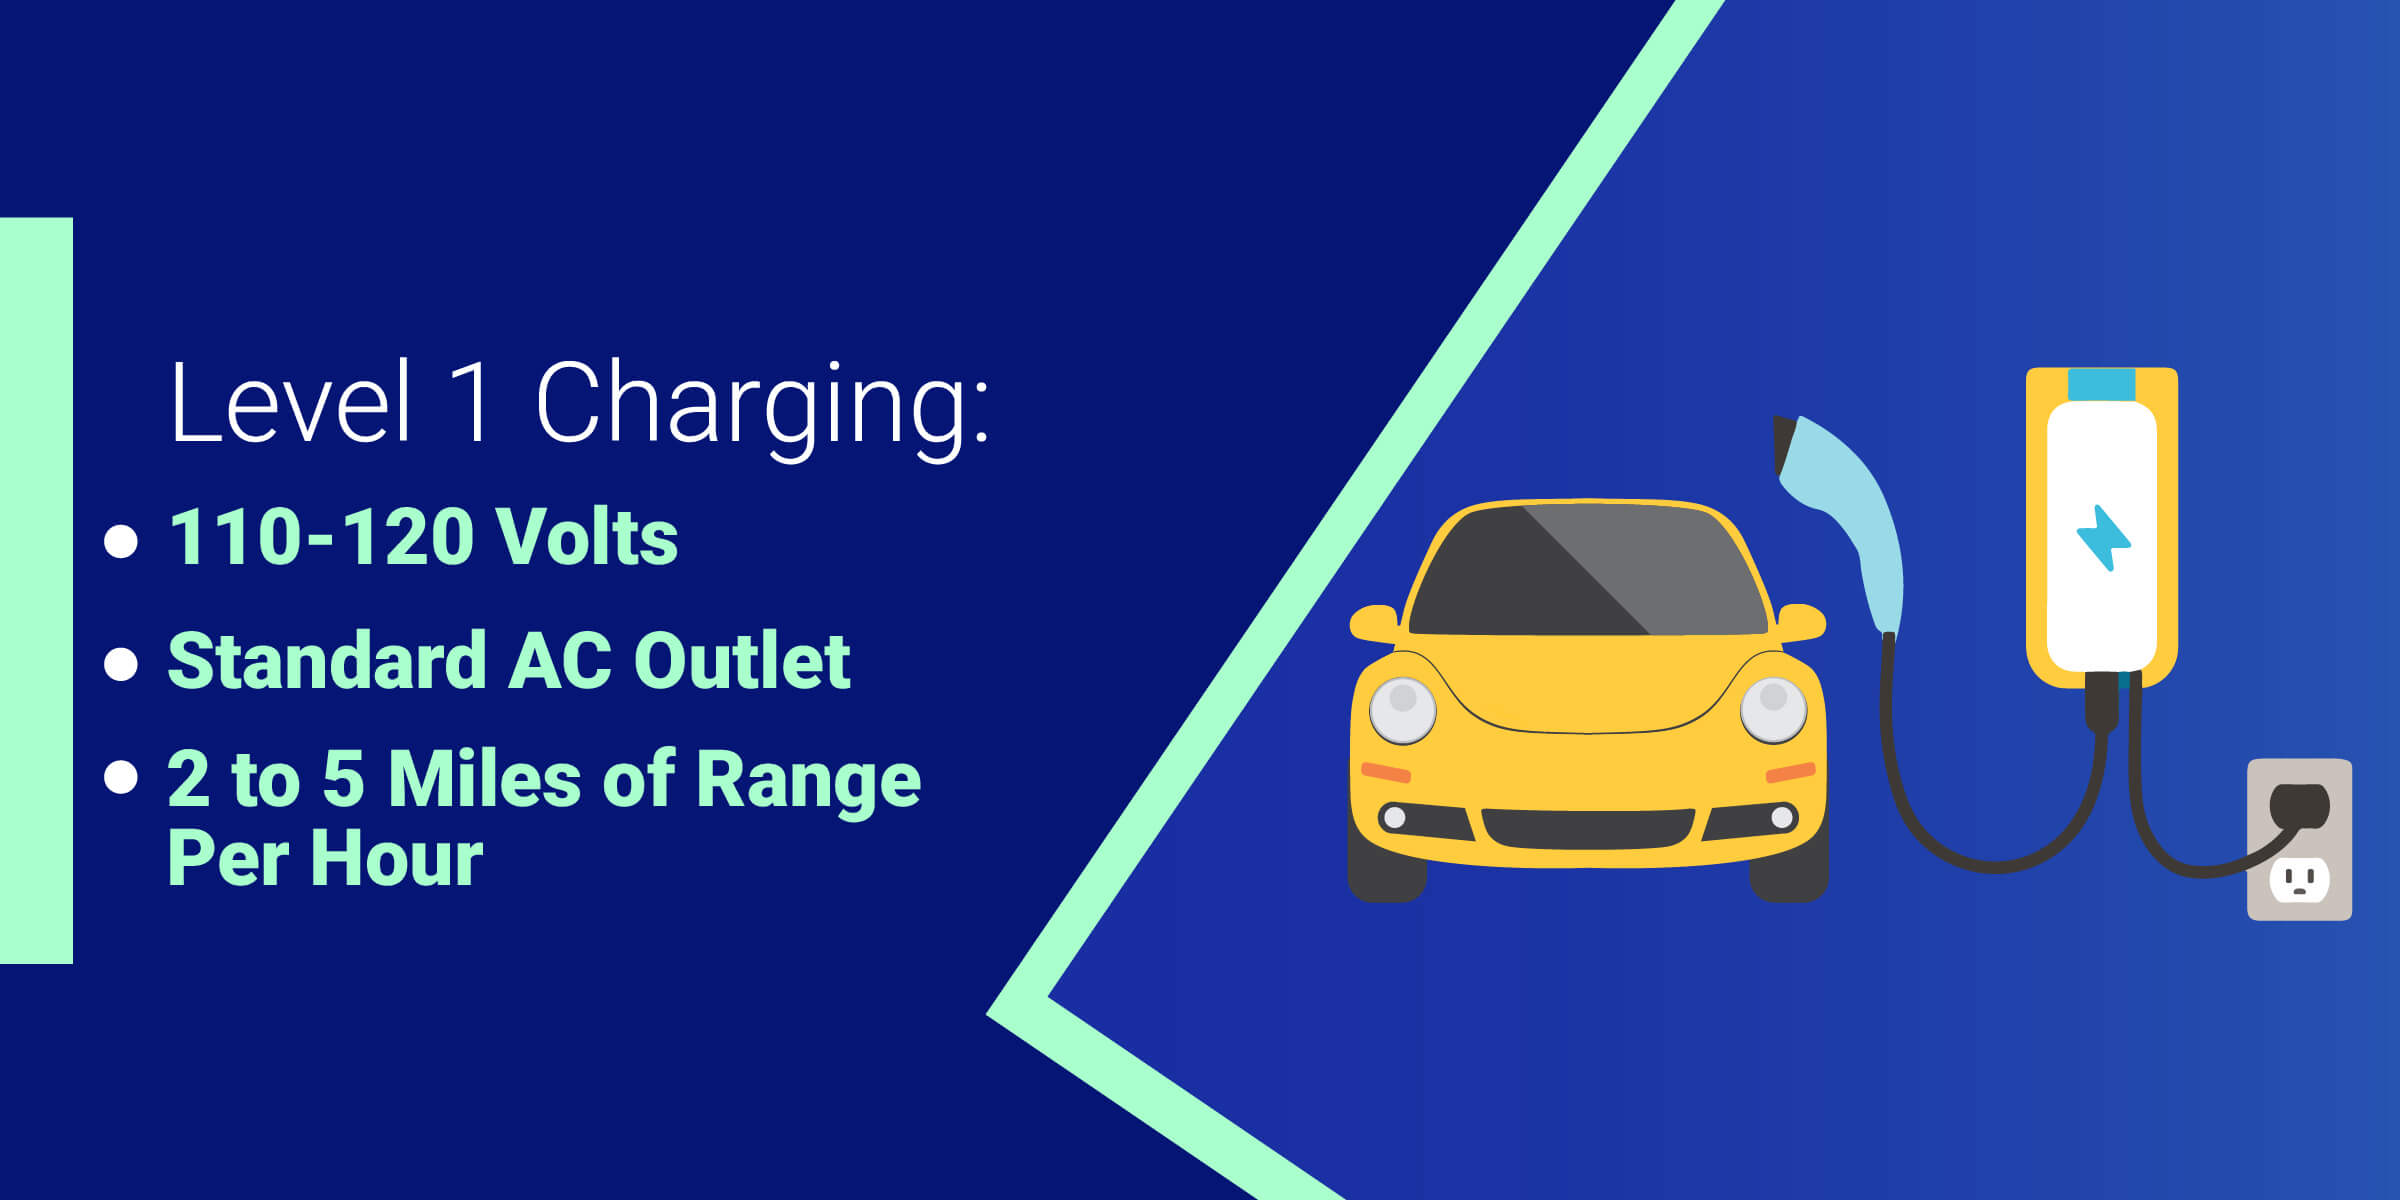 Level 1 Charging Answer